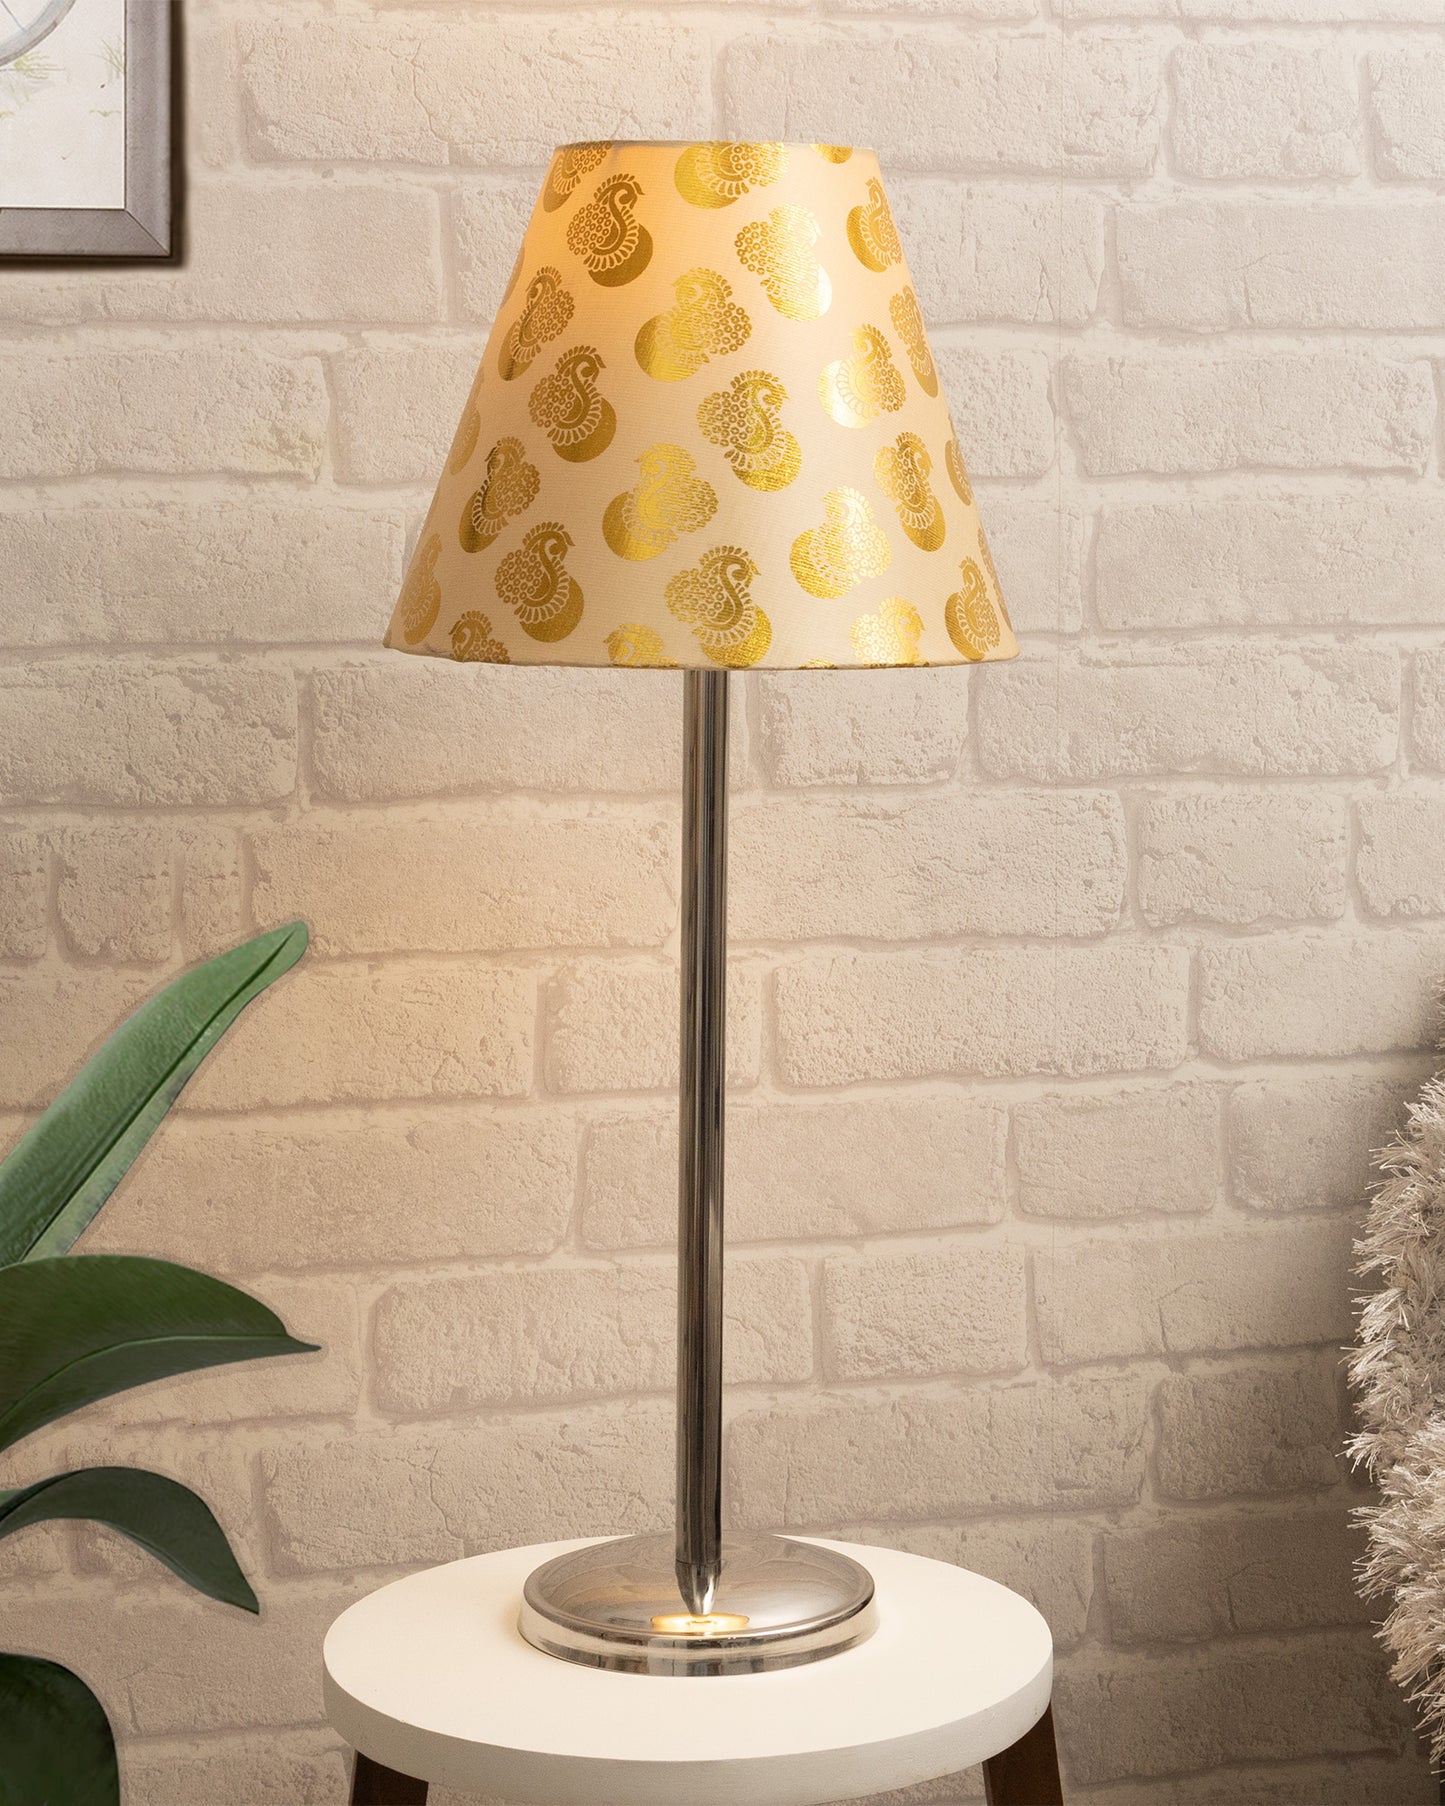 Gray Chrome 16" Suave Table Lamp with Fabric Shade, Bedside Light